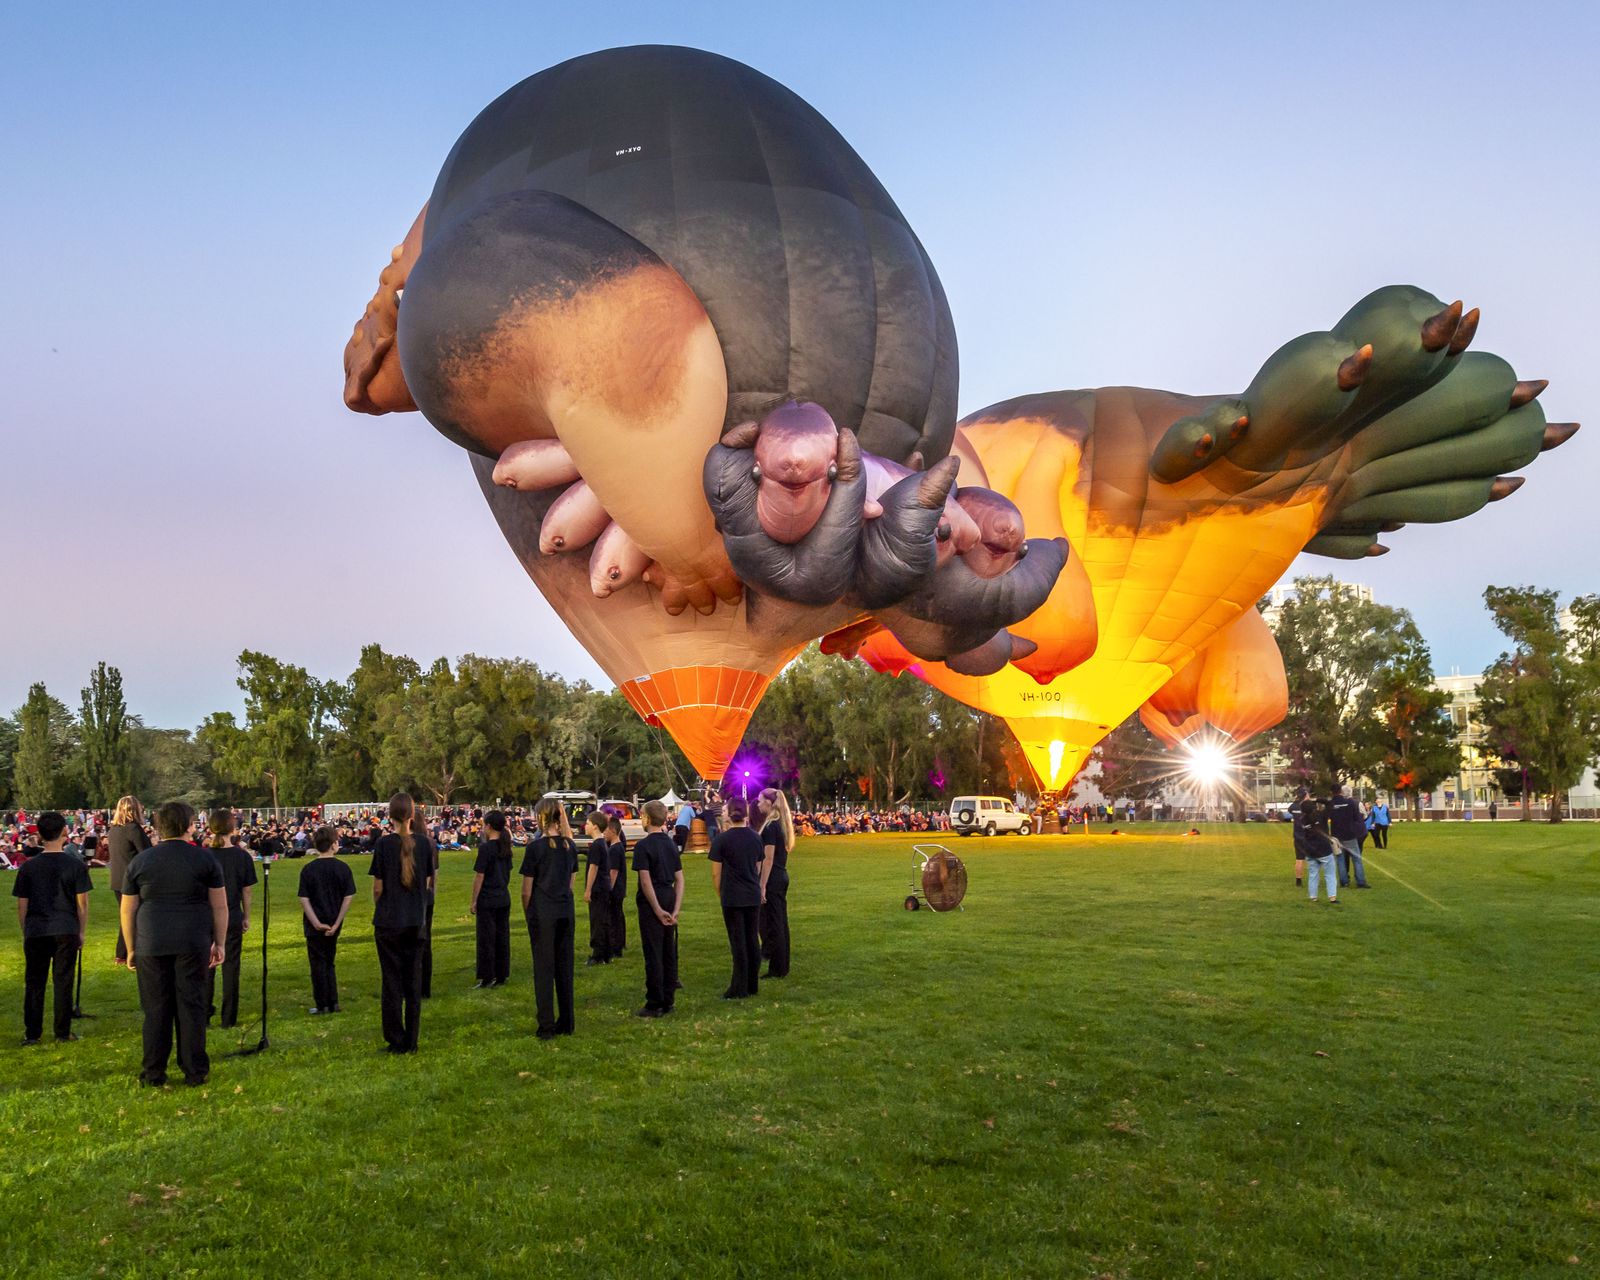 Image of Skywhale 2013 and Skywhalepapa 2020 at Canberra launch in 2021 with Luminescence Children's Choir